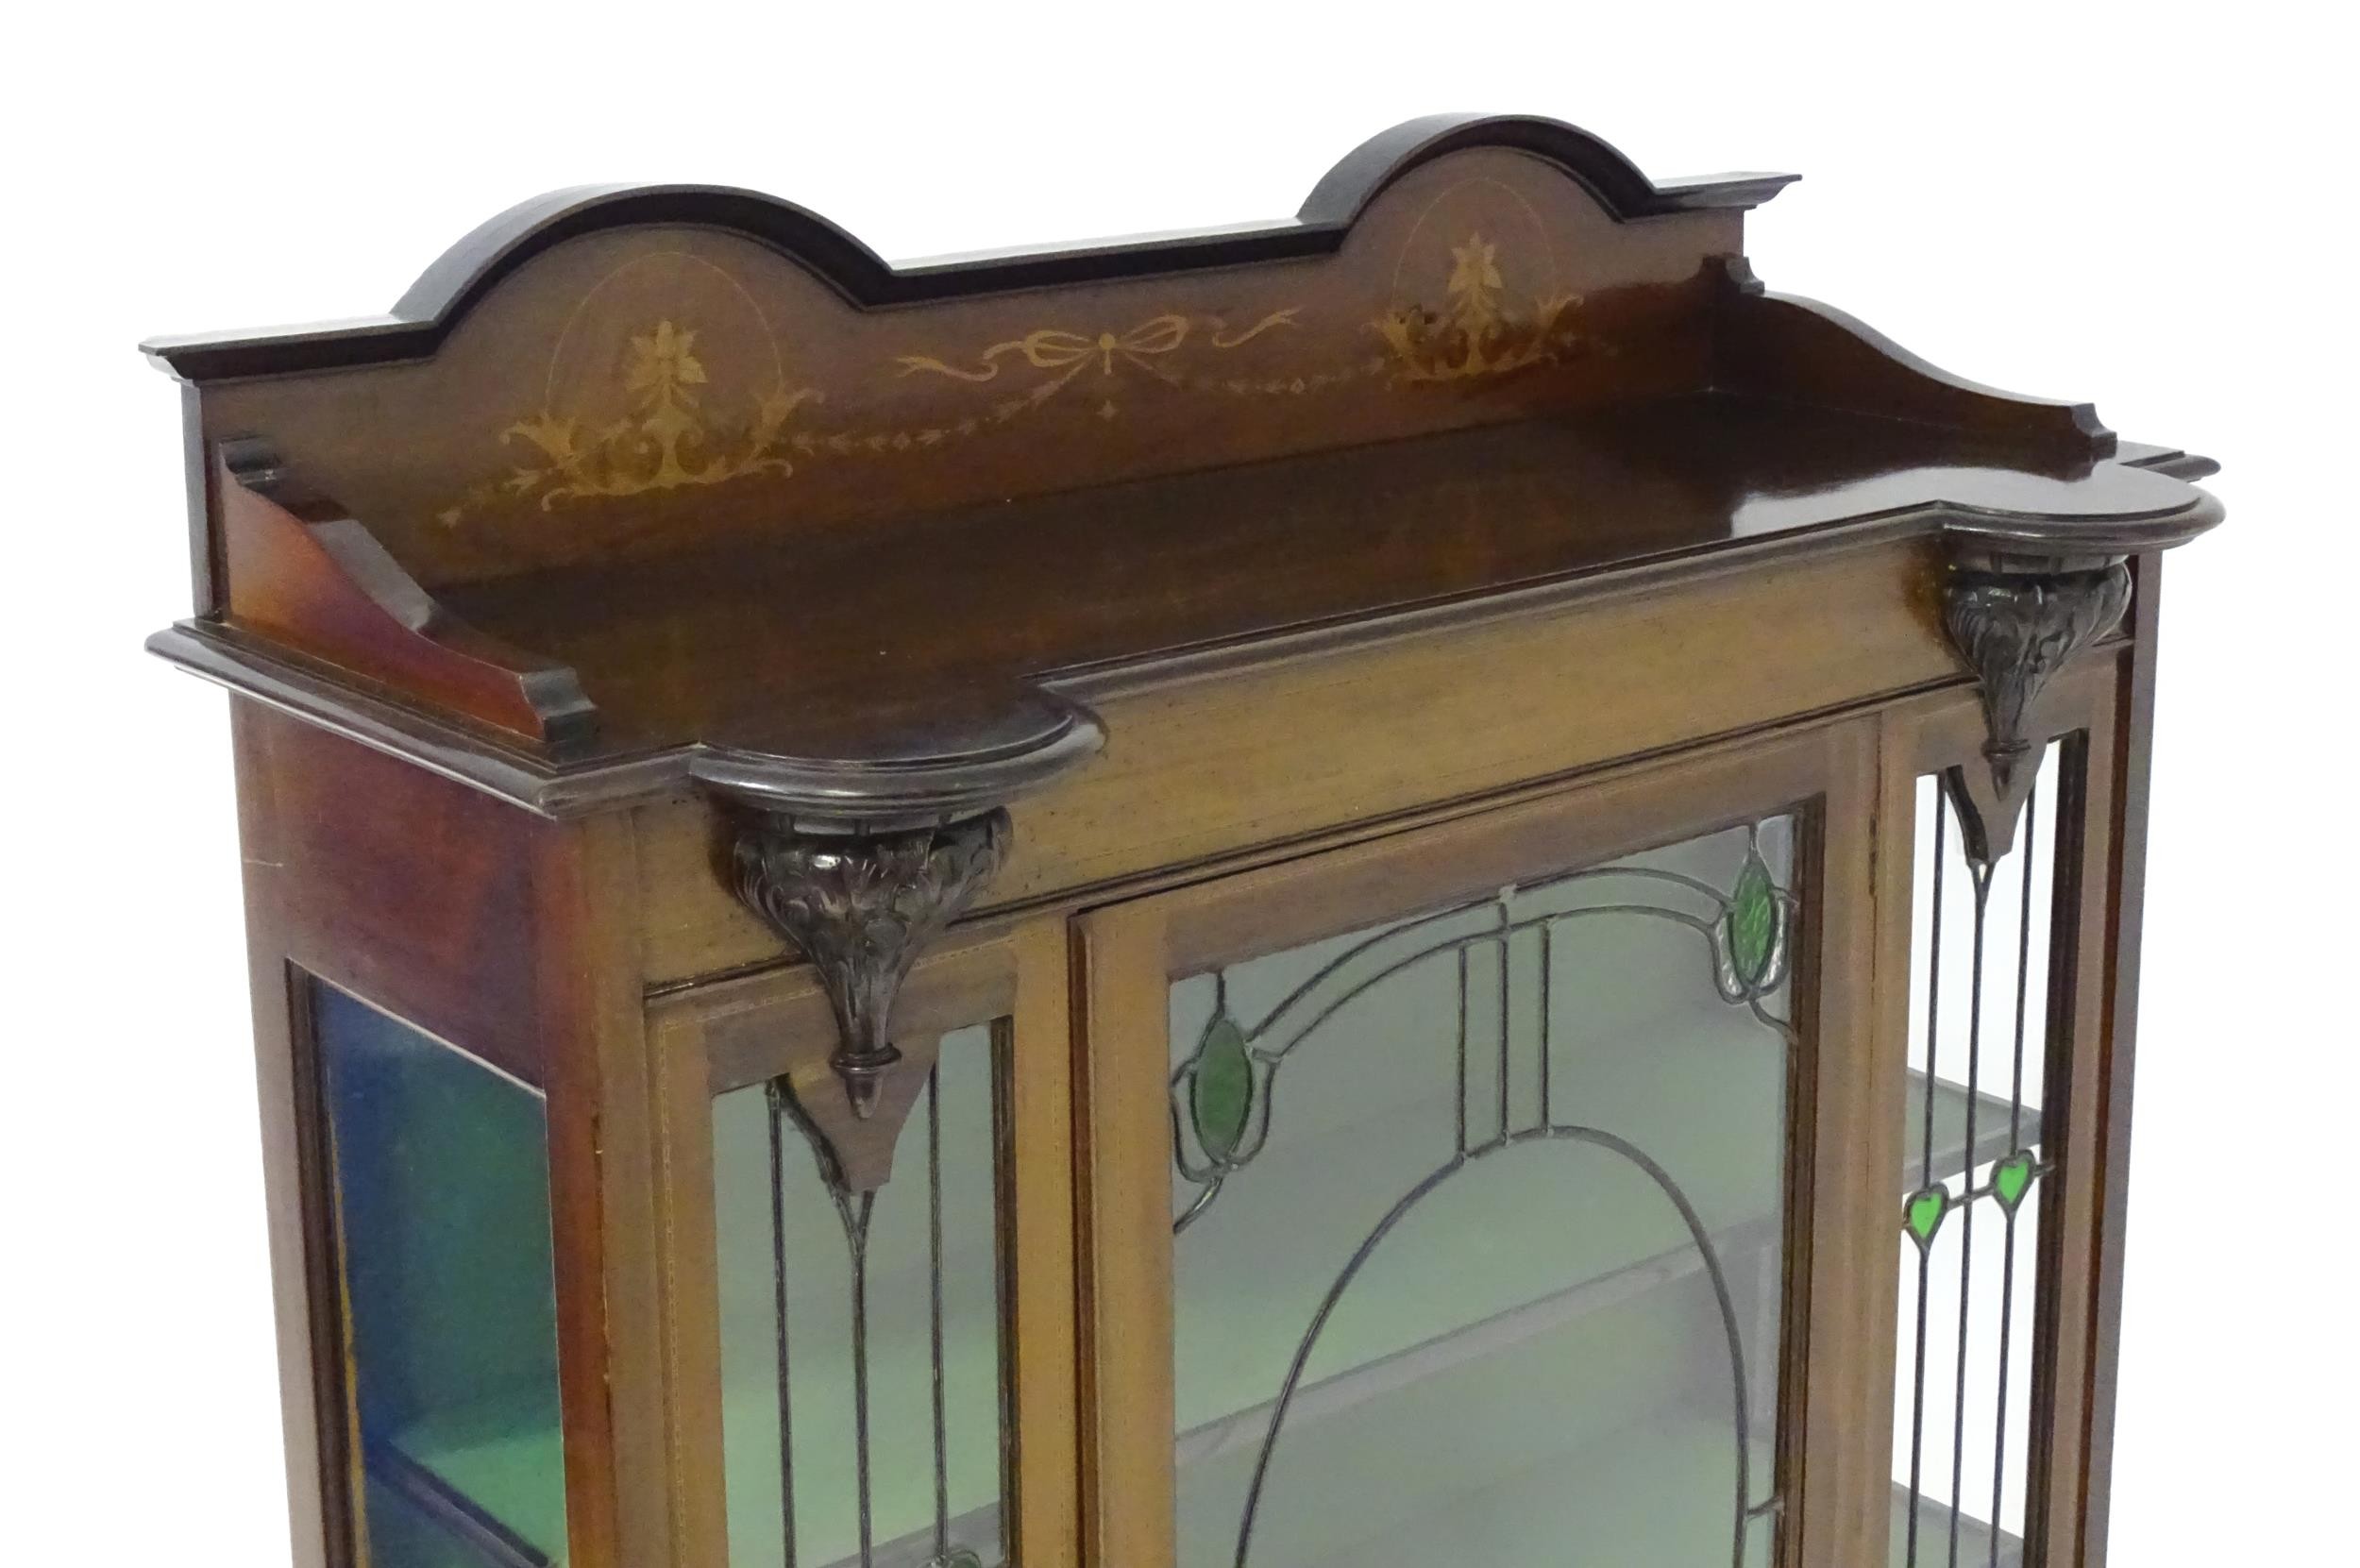 An Edwardian mahogany display cabinet with leaded glass panelling, stained glass panels and a - Image 2 of 12